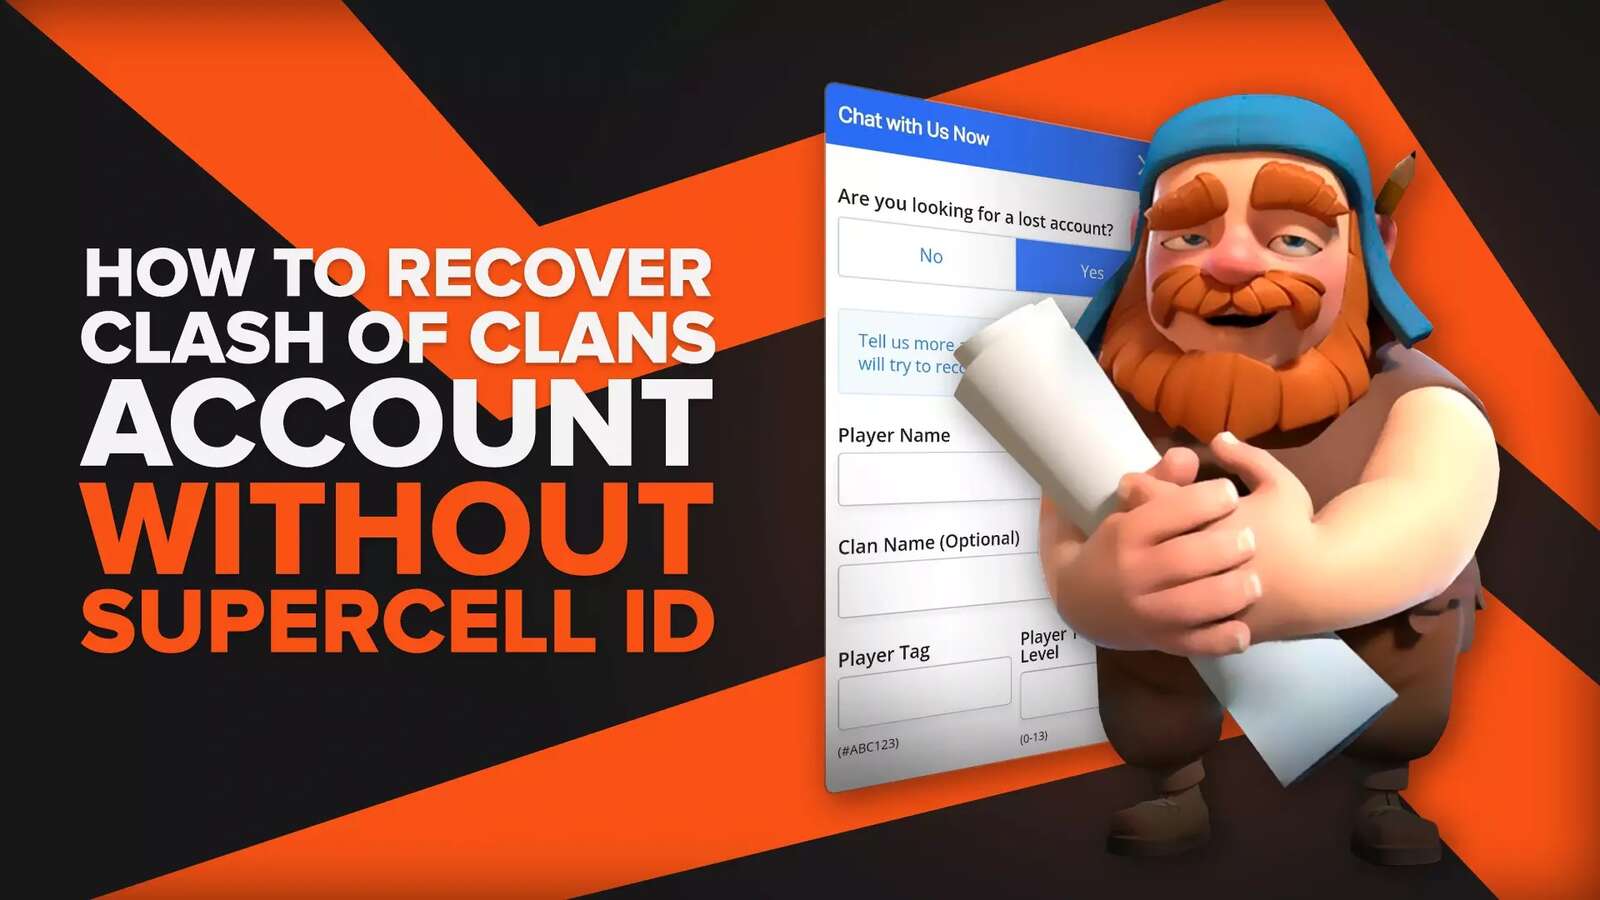 How To Recover A Clash of Clans Account Without Supercell ID